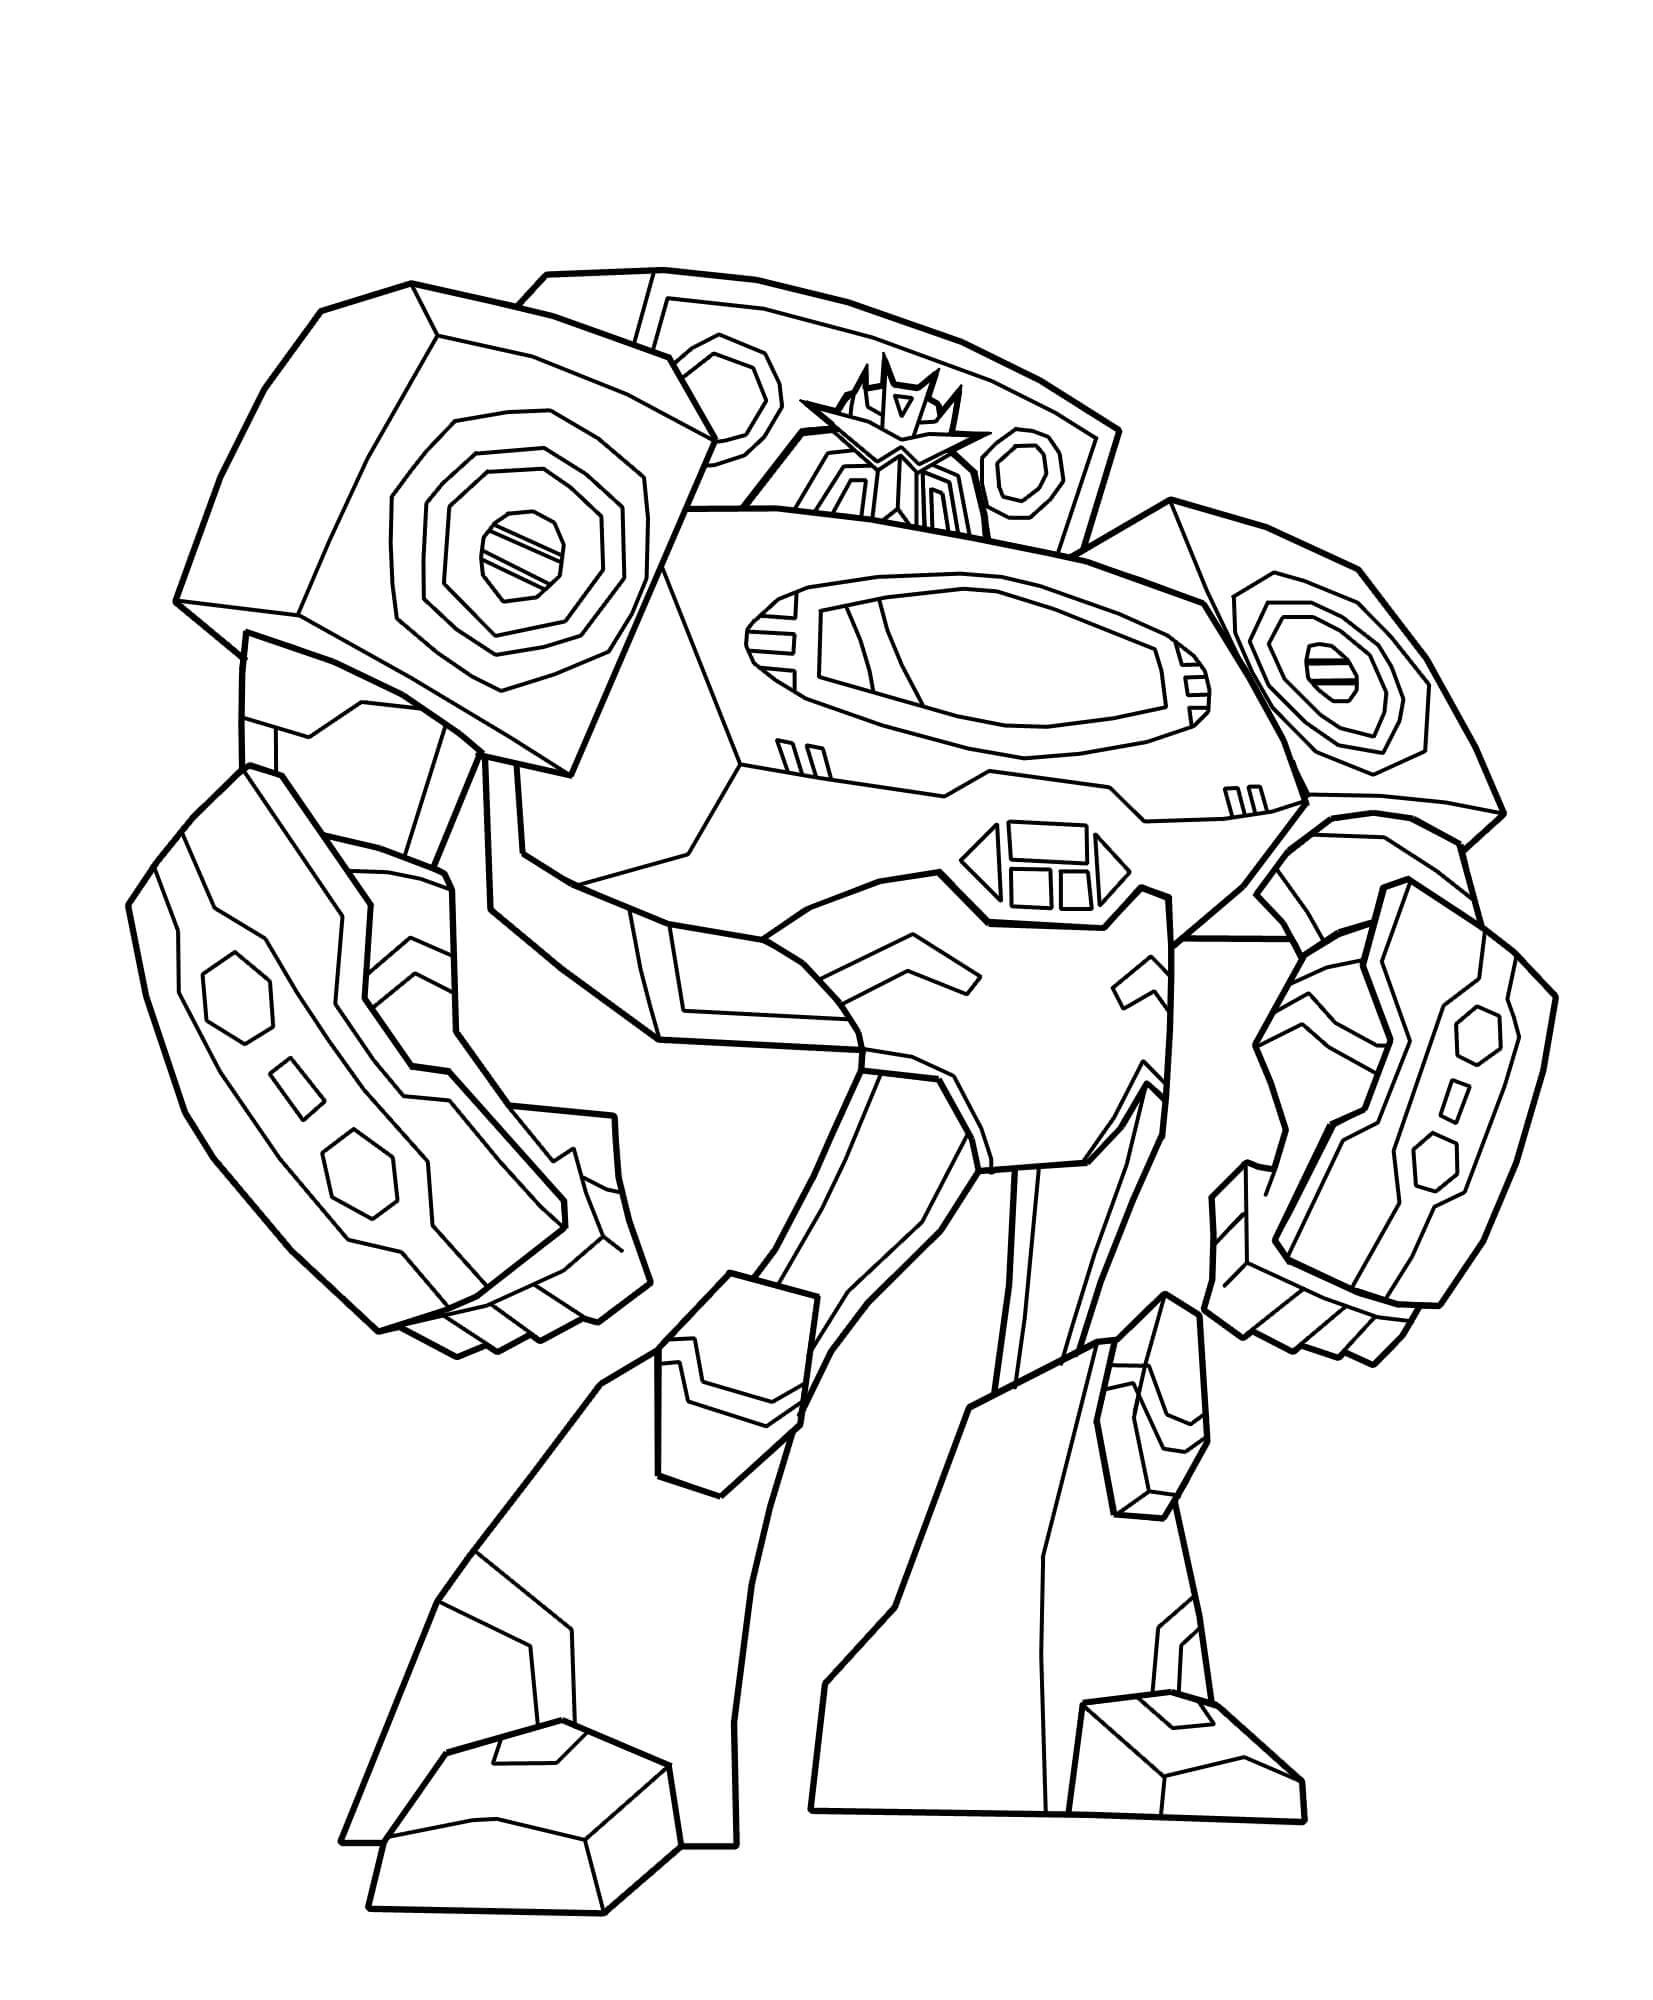 Free Transformers Coloring Page to Print